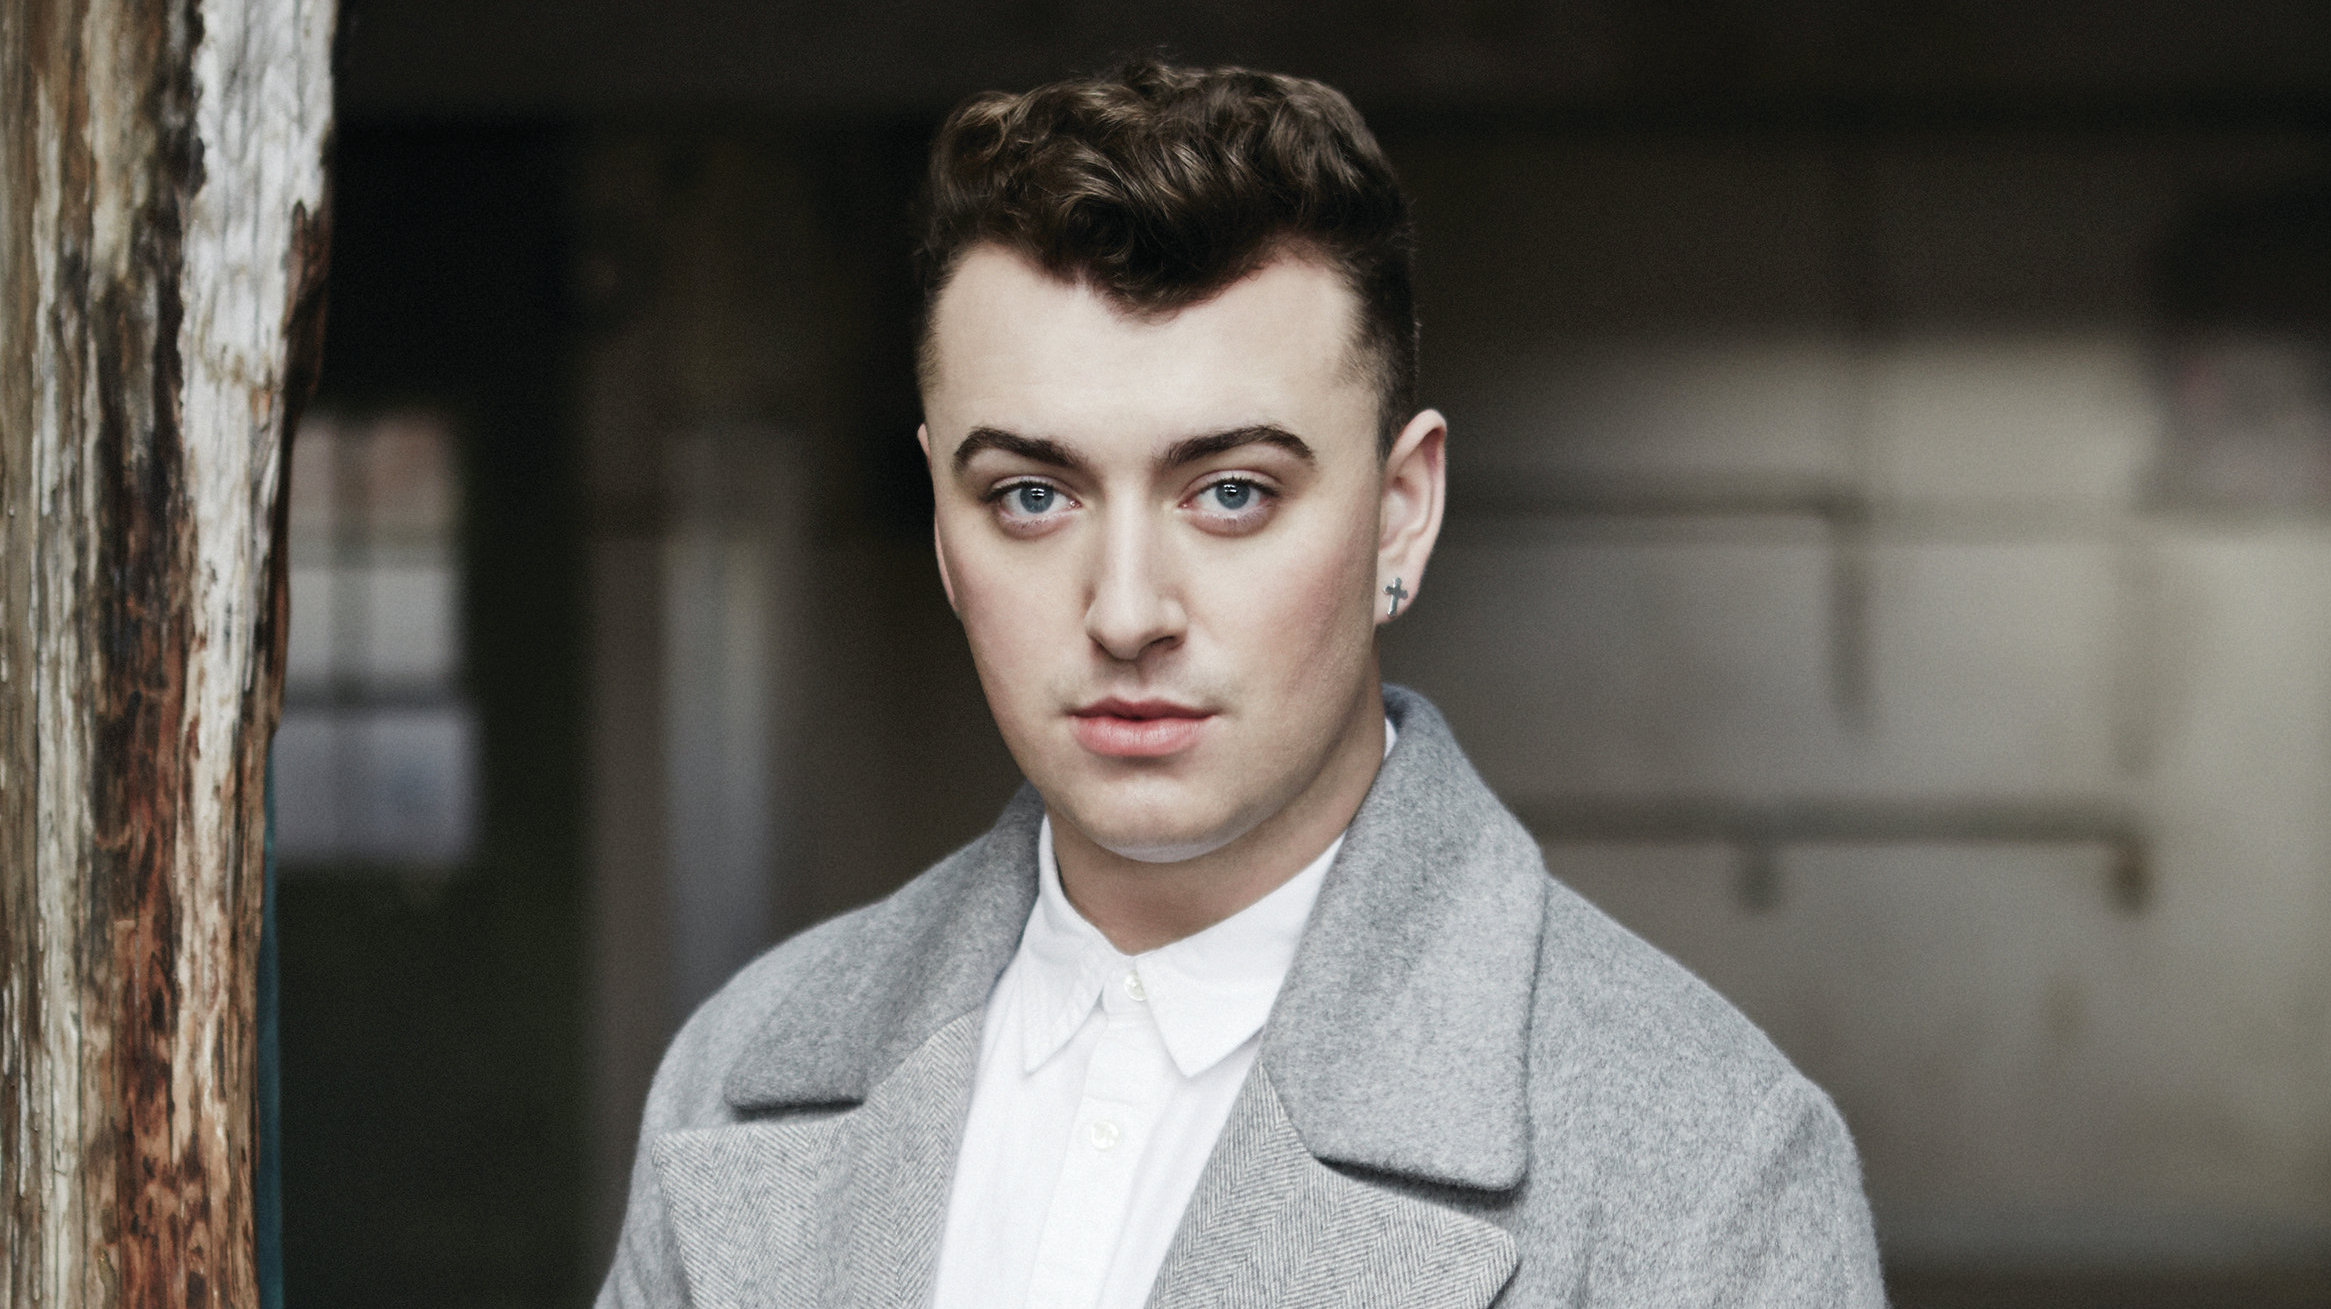 Sam Smith changes the lyrics on 'Stay With Me